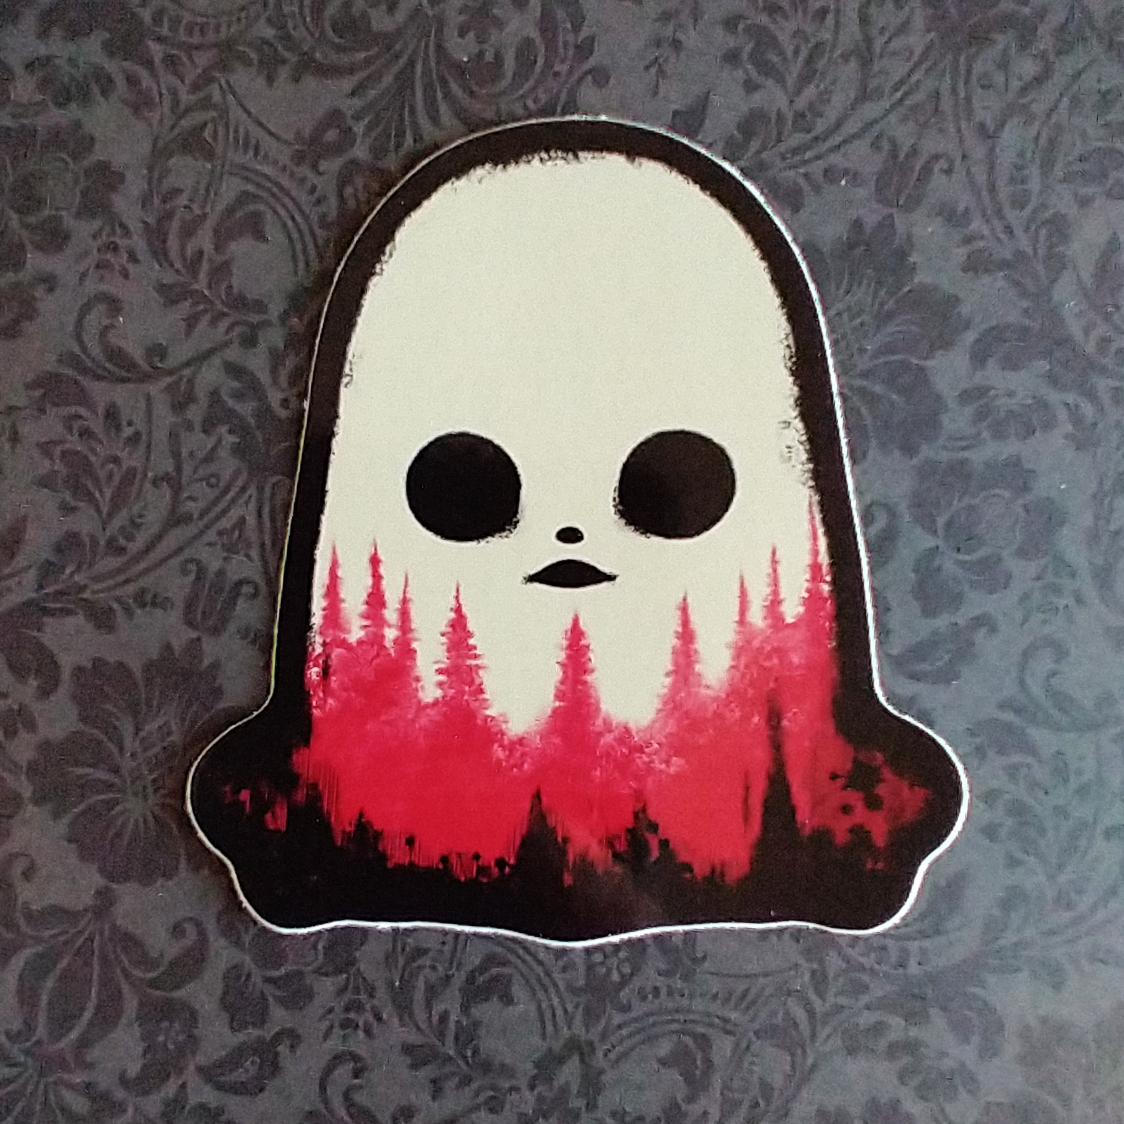 A black, white, and red sticker of a ghost with pine trees along the bottom. The ghost's mouth looks like a flying saucer, and the pine trees look a bit like blood.